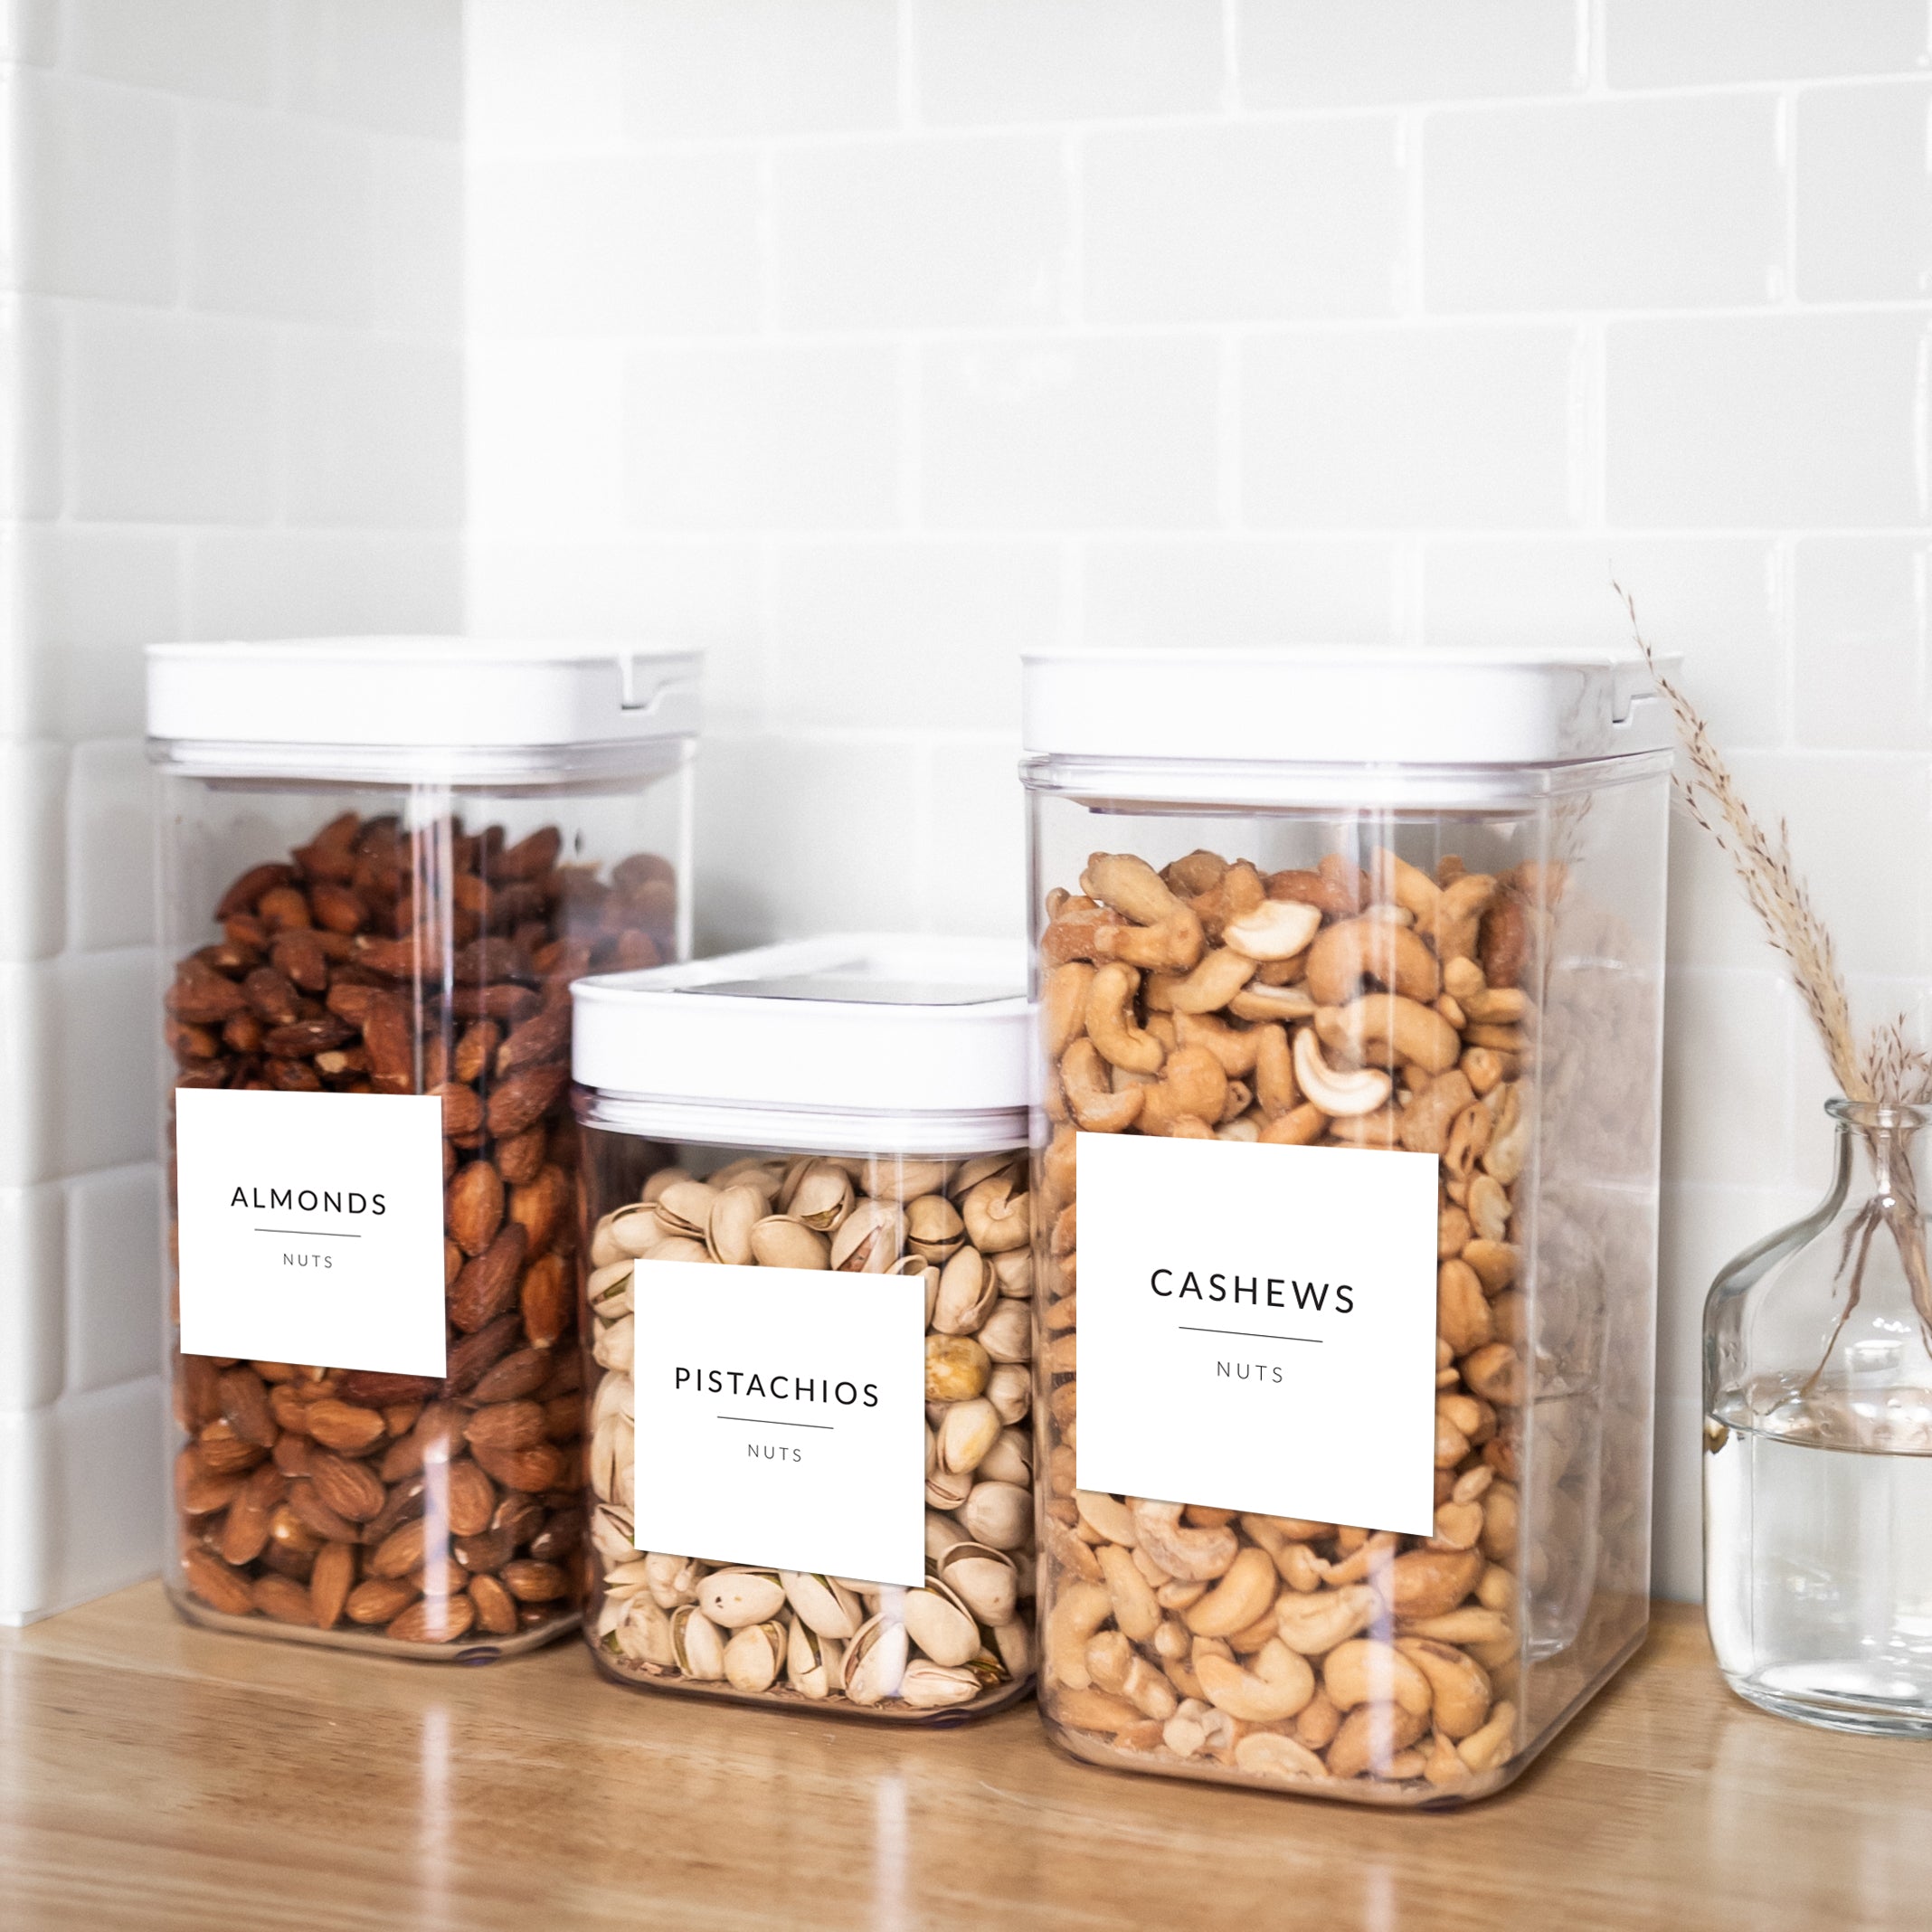 Minimalist Pantry - 179 Labels - Savvy & Sorted